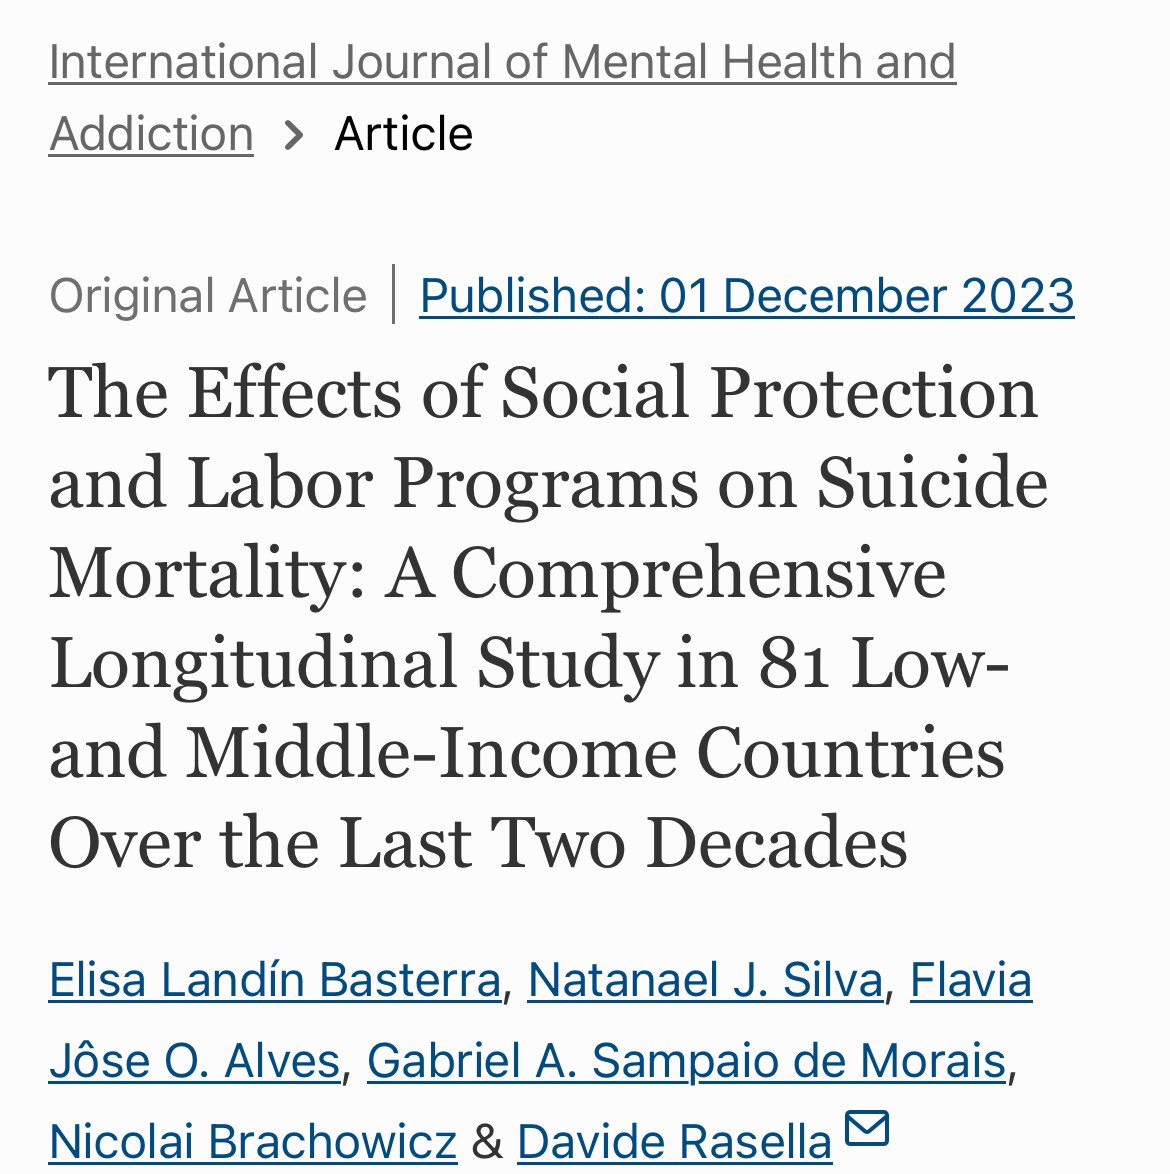 Can #socialprotection & active labor (SPL) programs increase hope in life? “a 1% increase in SPL coverage was associated with a decline of 0.19% in suicide rates. Strongest effects were among the youth (10–24 ys) with a 0.21% reduction”. Basterra et al link.springer.com/article/10.100…